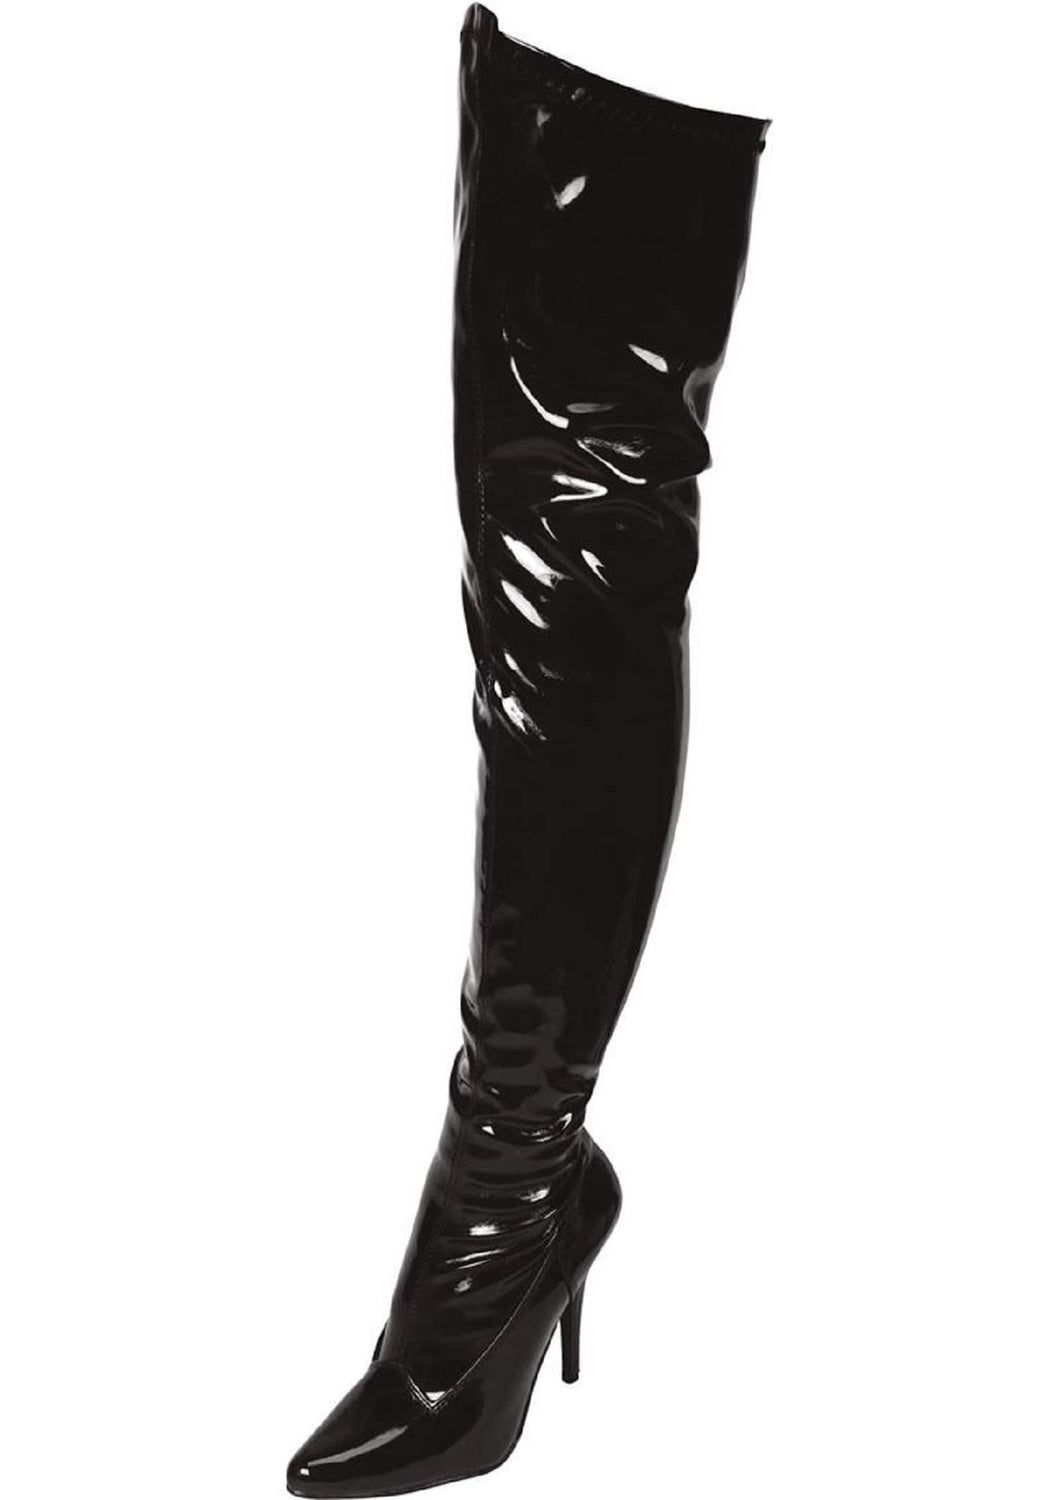 Black Pointed Toe Thigh High Boot 5in Heel Size 7. - Beautiful Stranger 2020